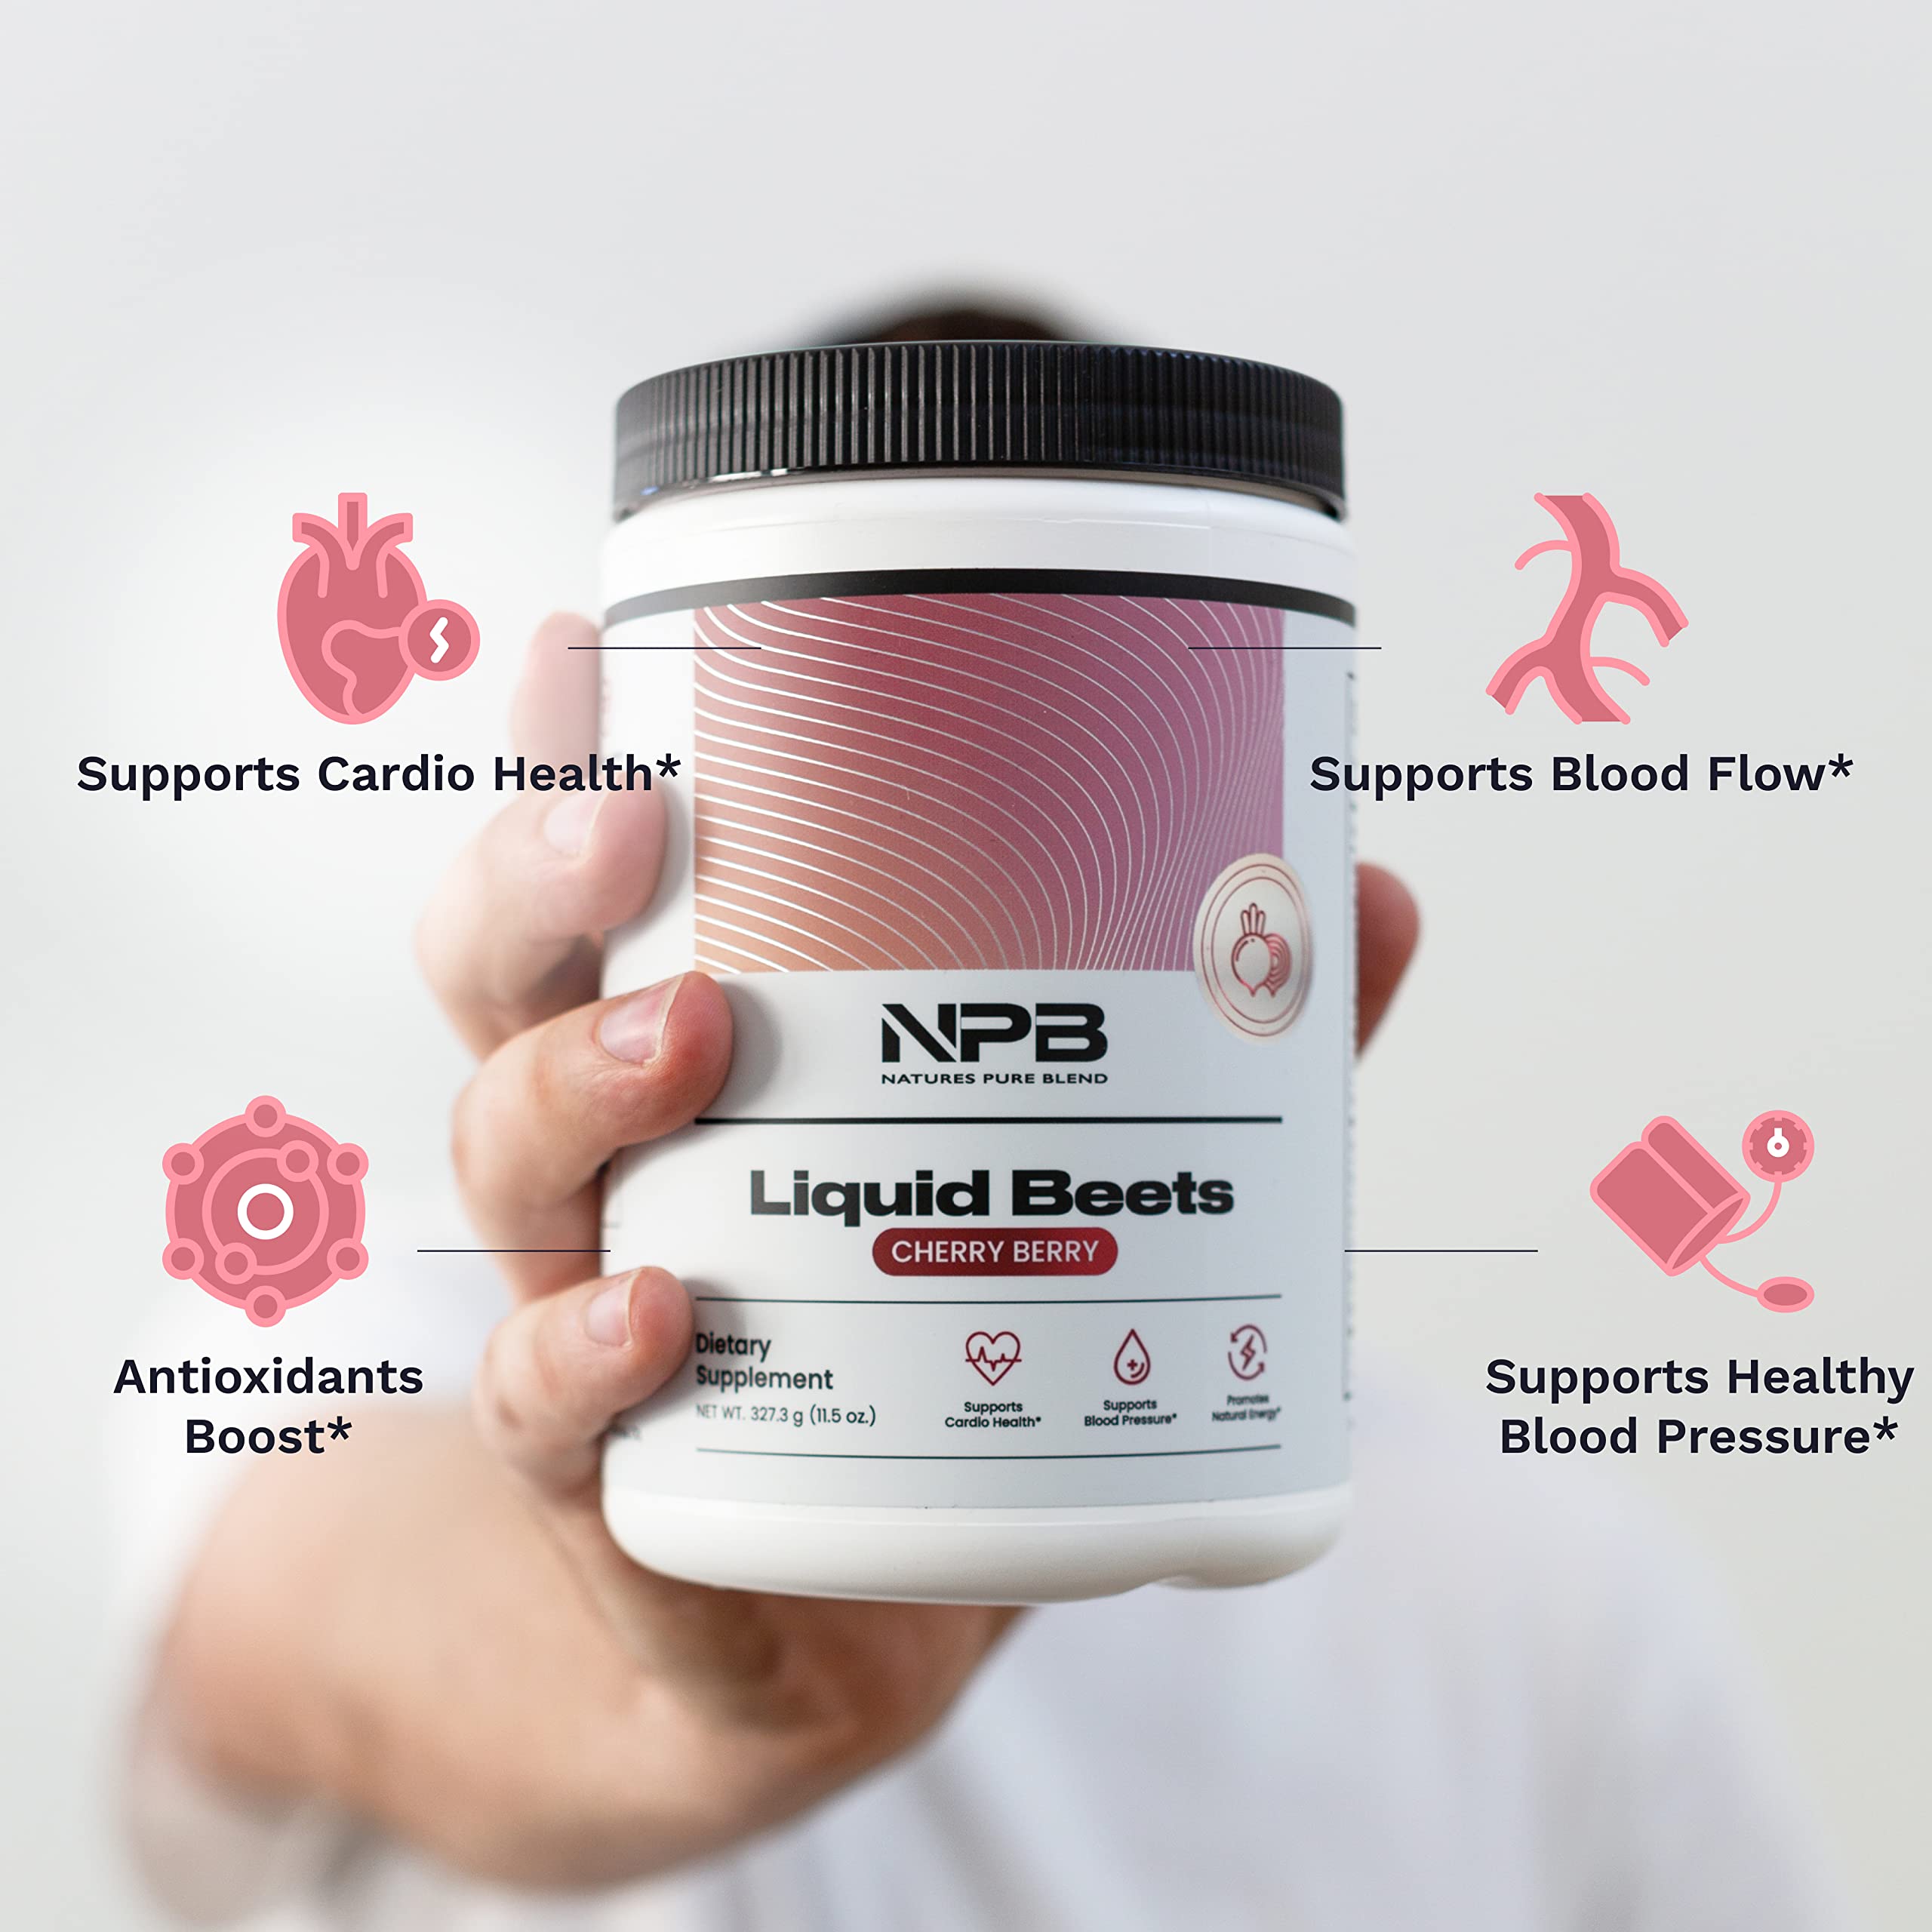 Nature's Pure Blend - Liquid Beets (8,000 MG Organic Beets), Support Blood Pressure, Blood Circulation, Heart Health - Energy - Nitric Oxide Supplement, L-Arginine - Cherry Berry Flavor (30 Servings)